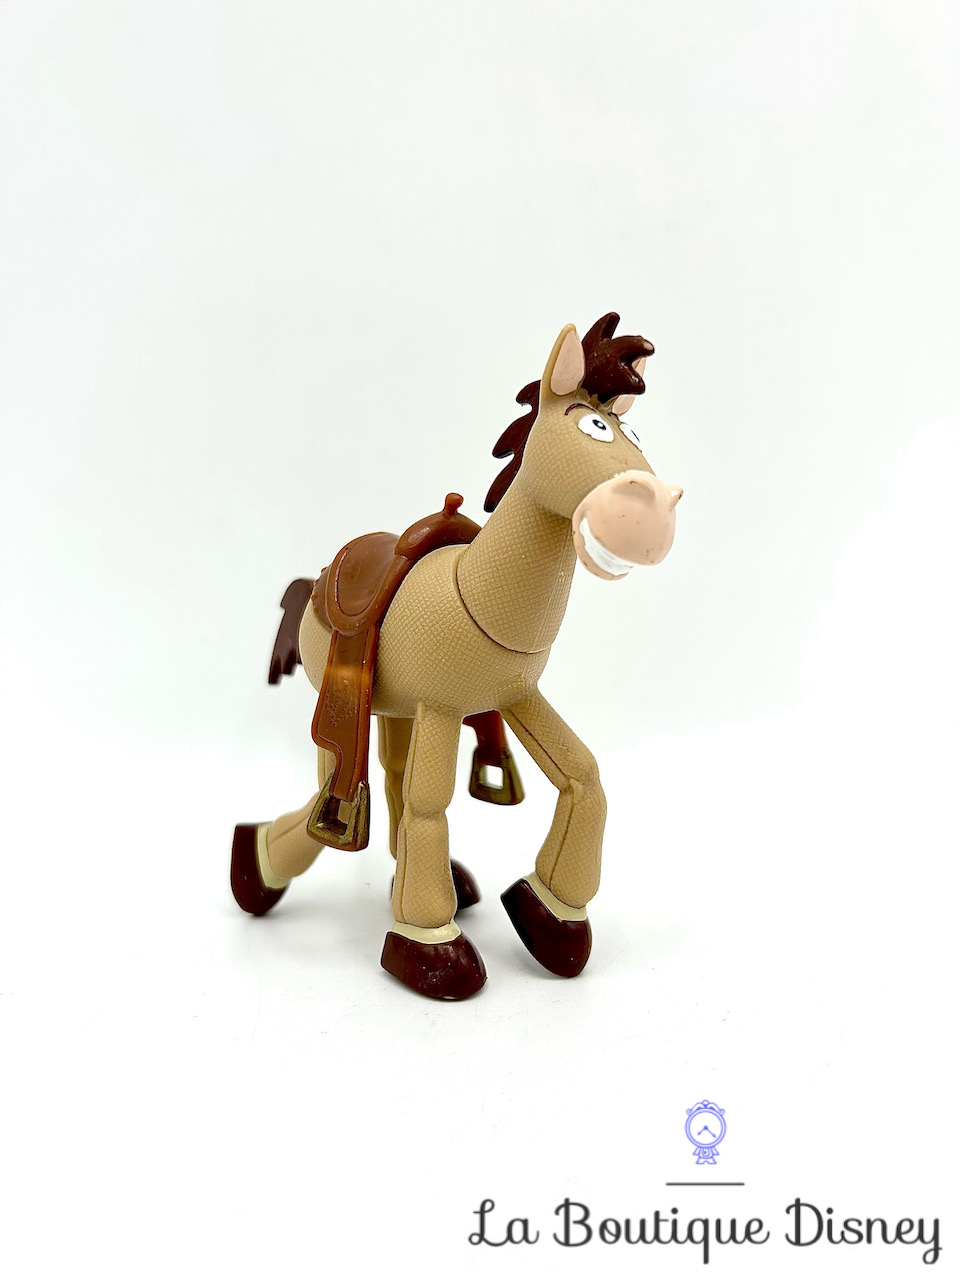 figurine-pile-poil-toy-story-disney-store-playst-cheval-marorn-2